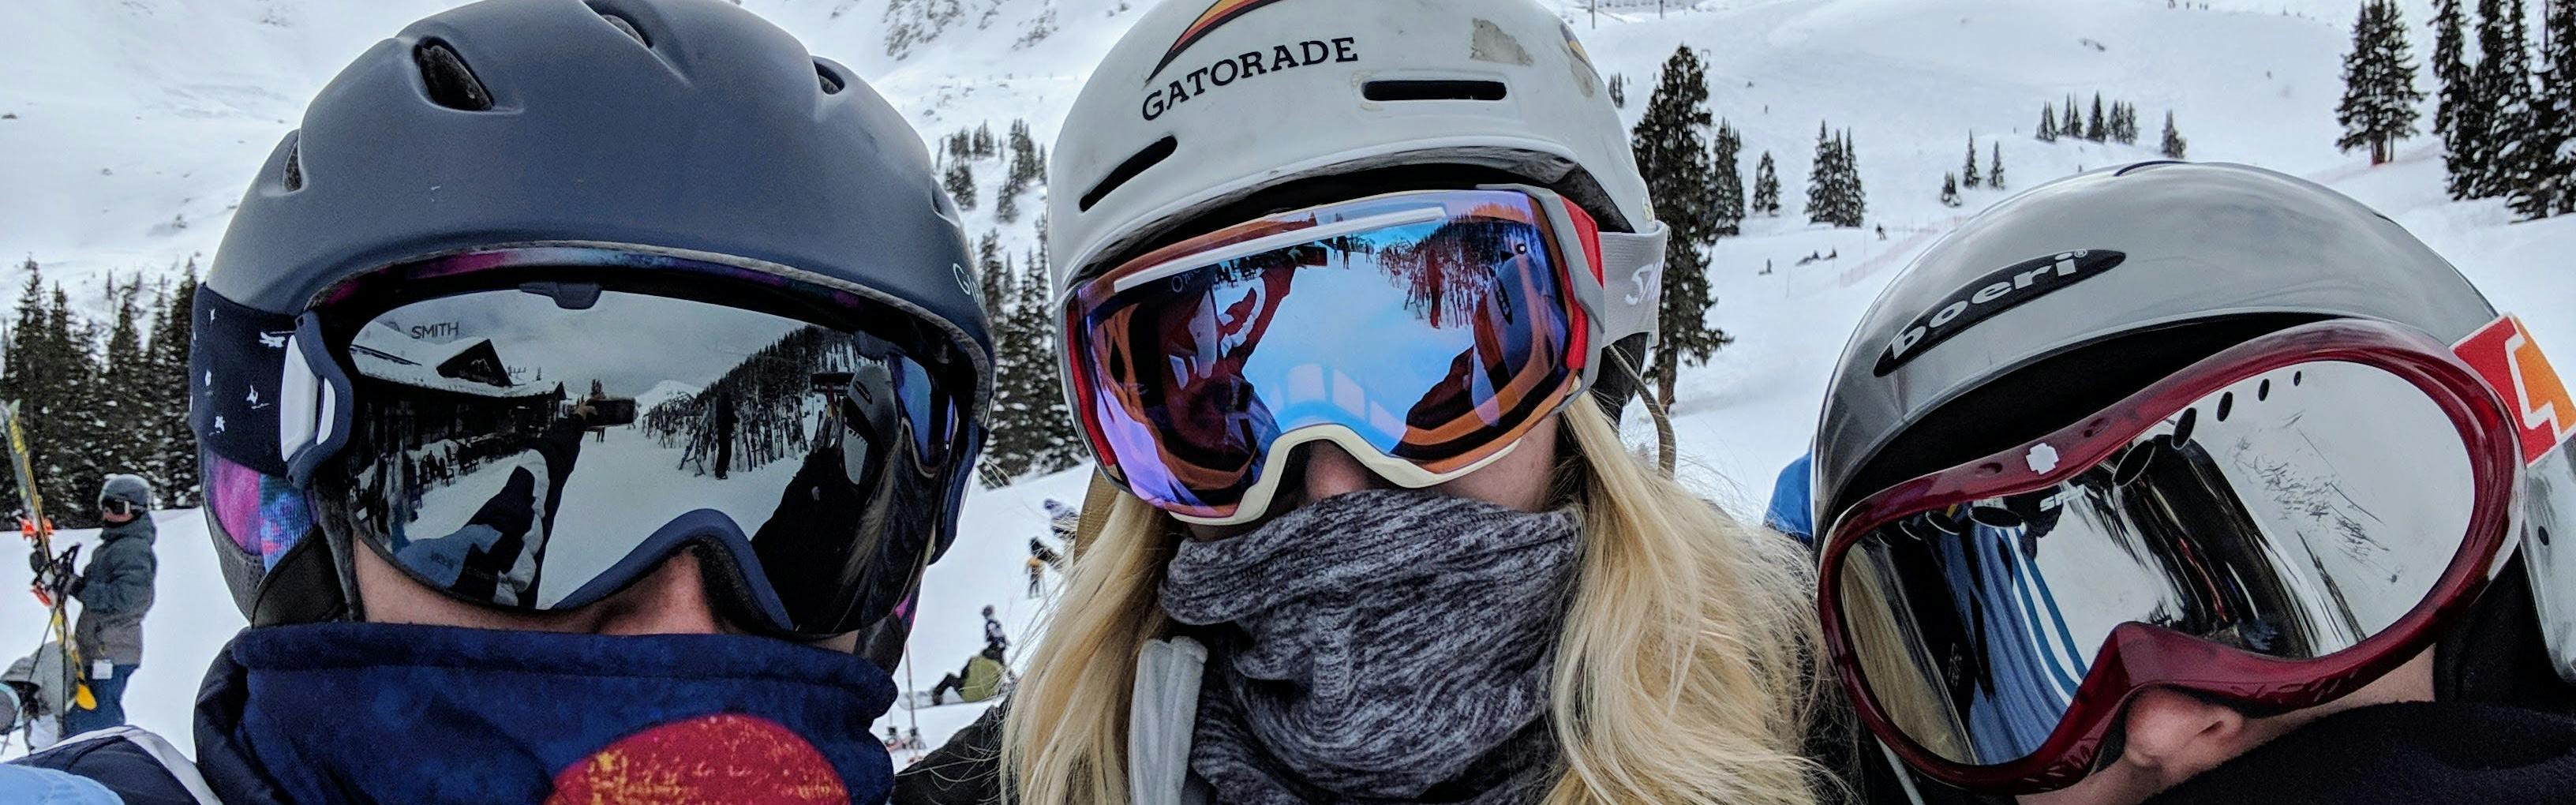 How Often Do You Need To Replace Your Ski or Snowboard Helmet?